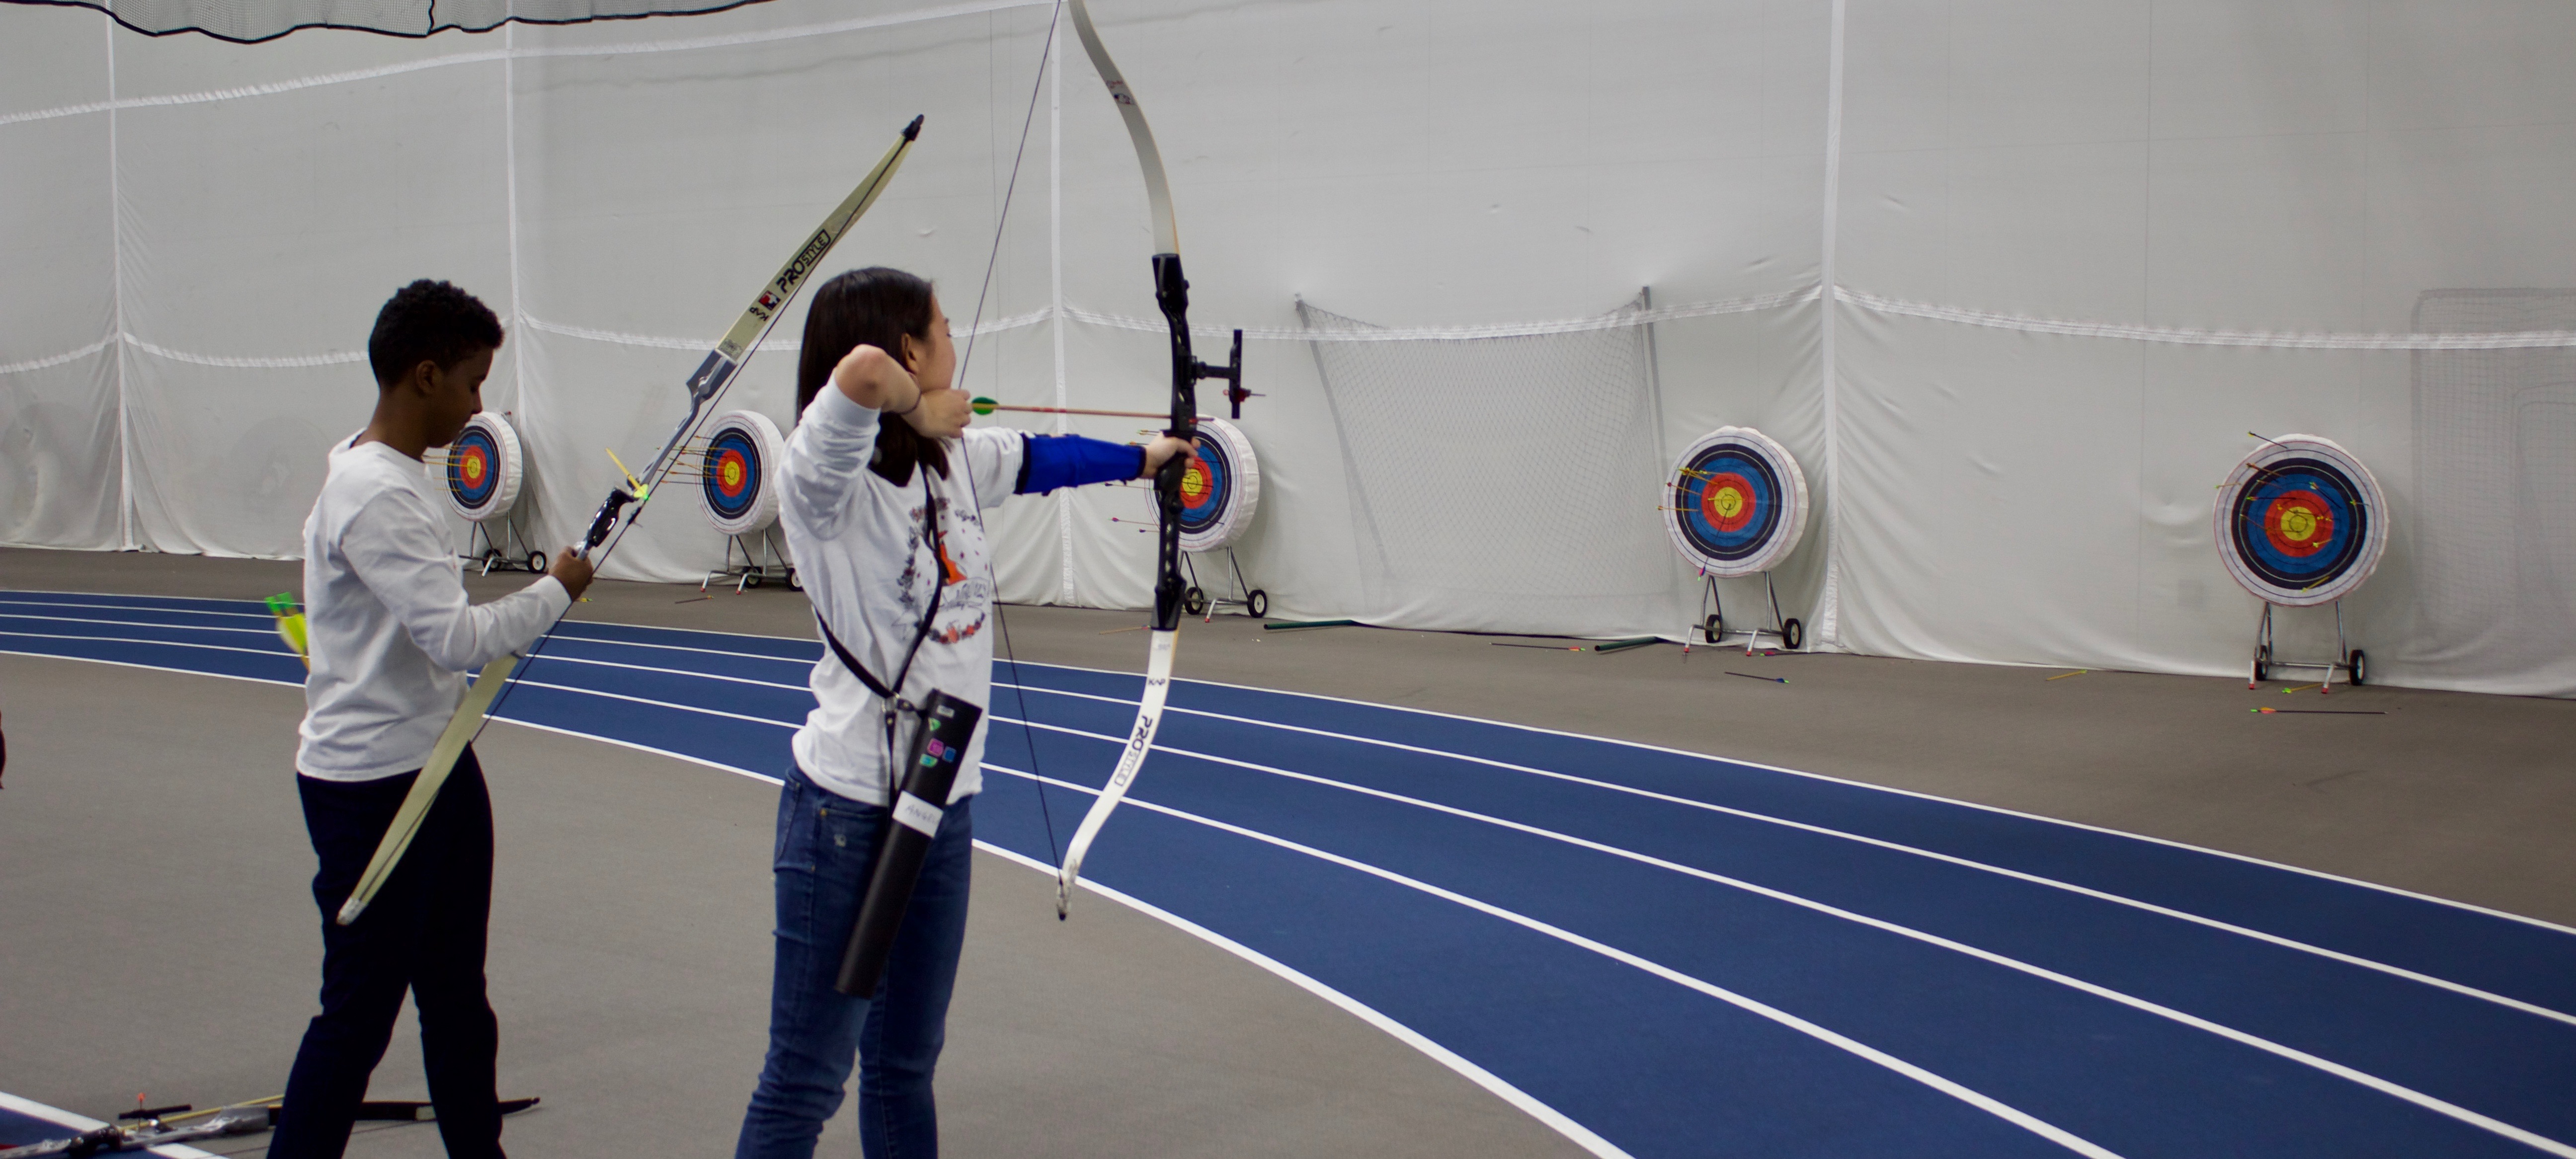 students taking aim at a target in an archery class